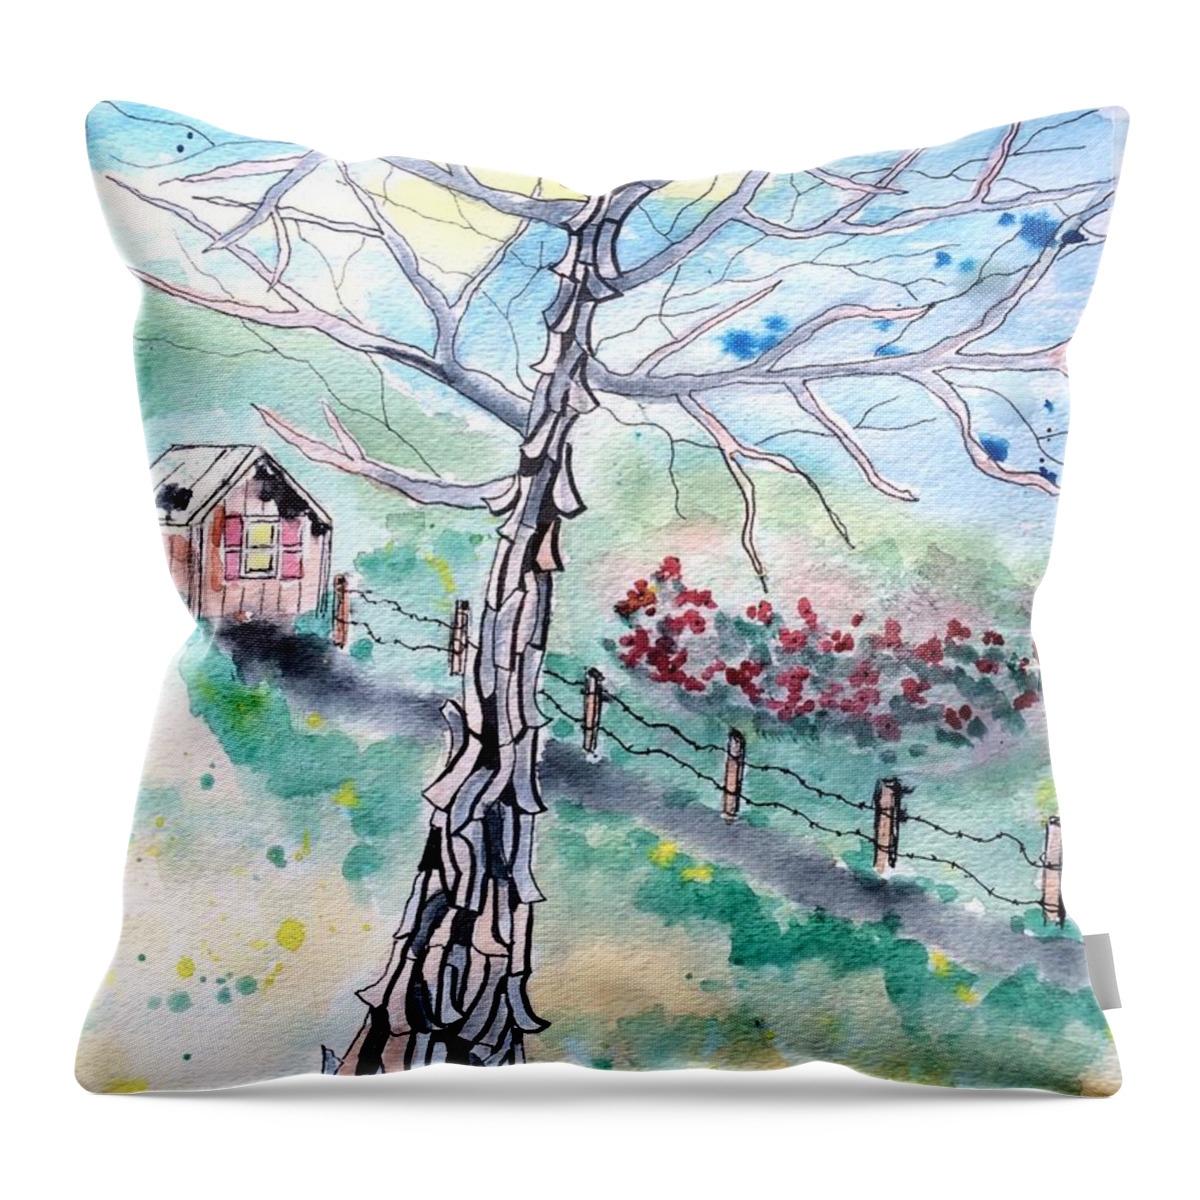 Hickory Tree Throw Pillow featuring the painting Hickory by Denise Tomasura